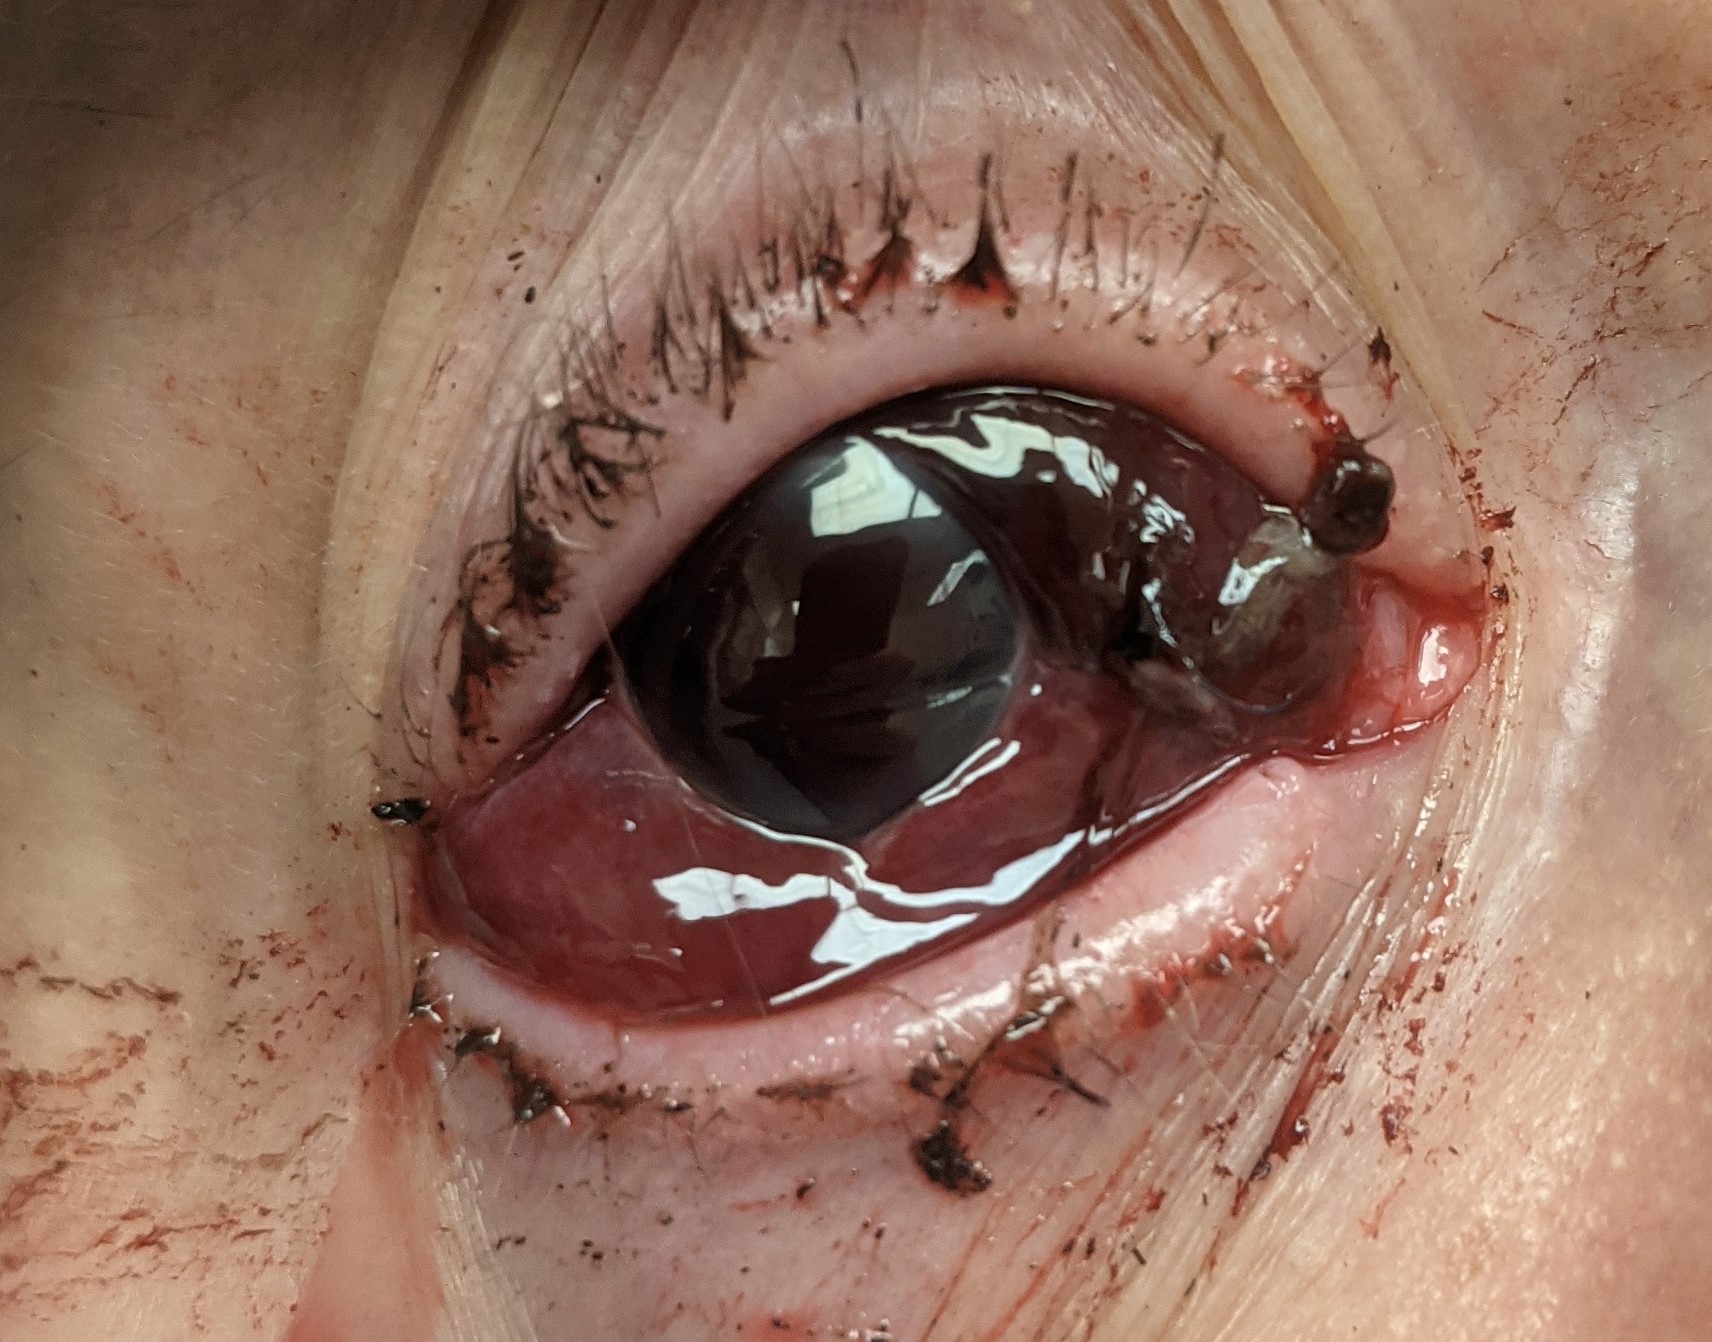 Corneoscleral laceration with tissue prolapse.